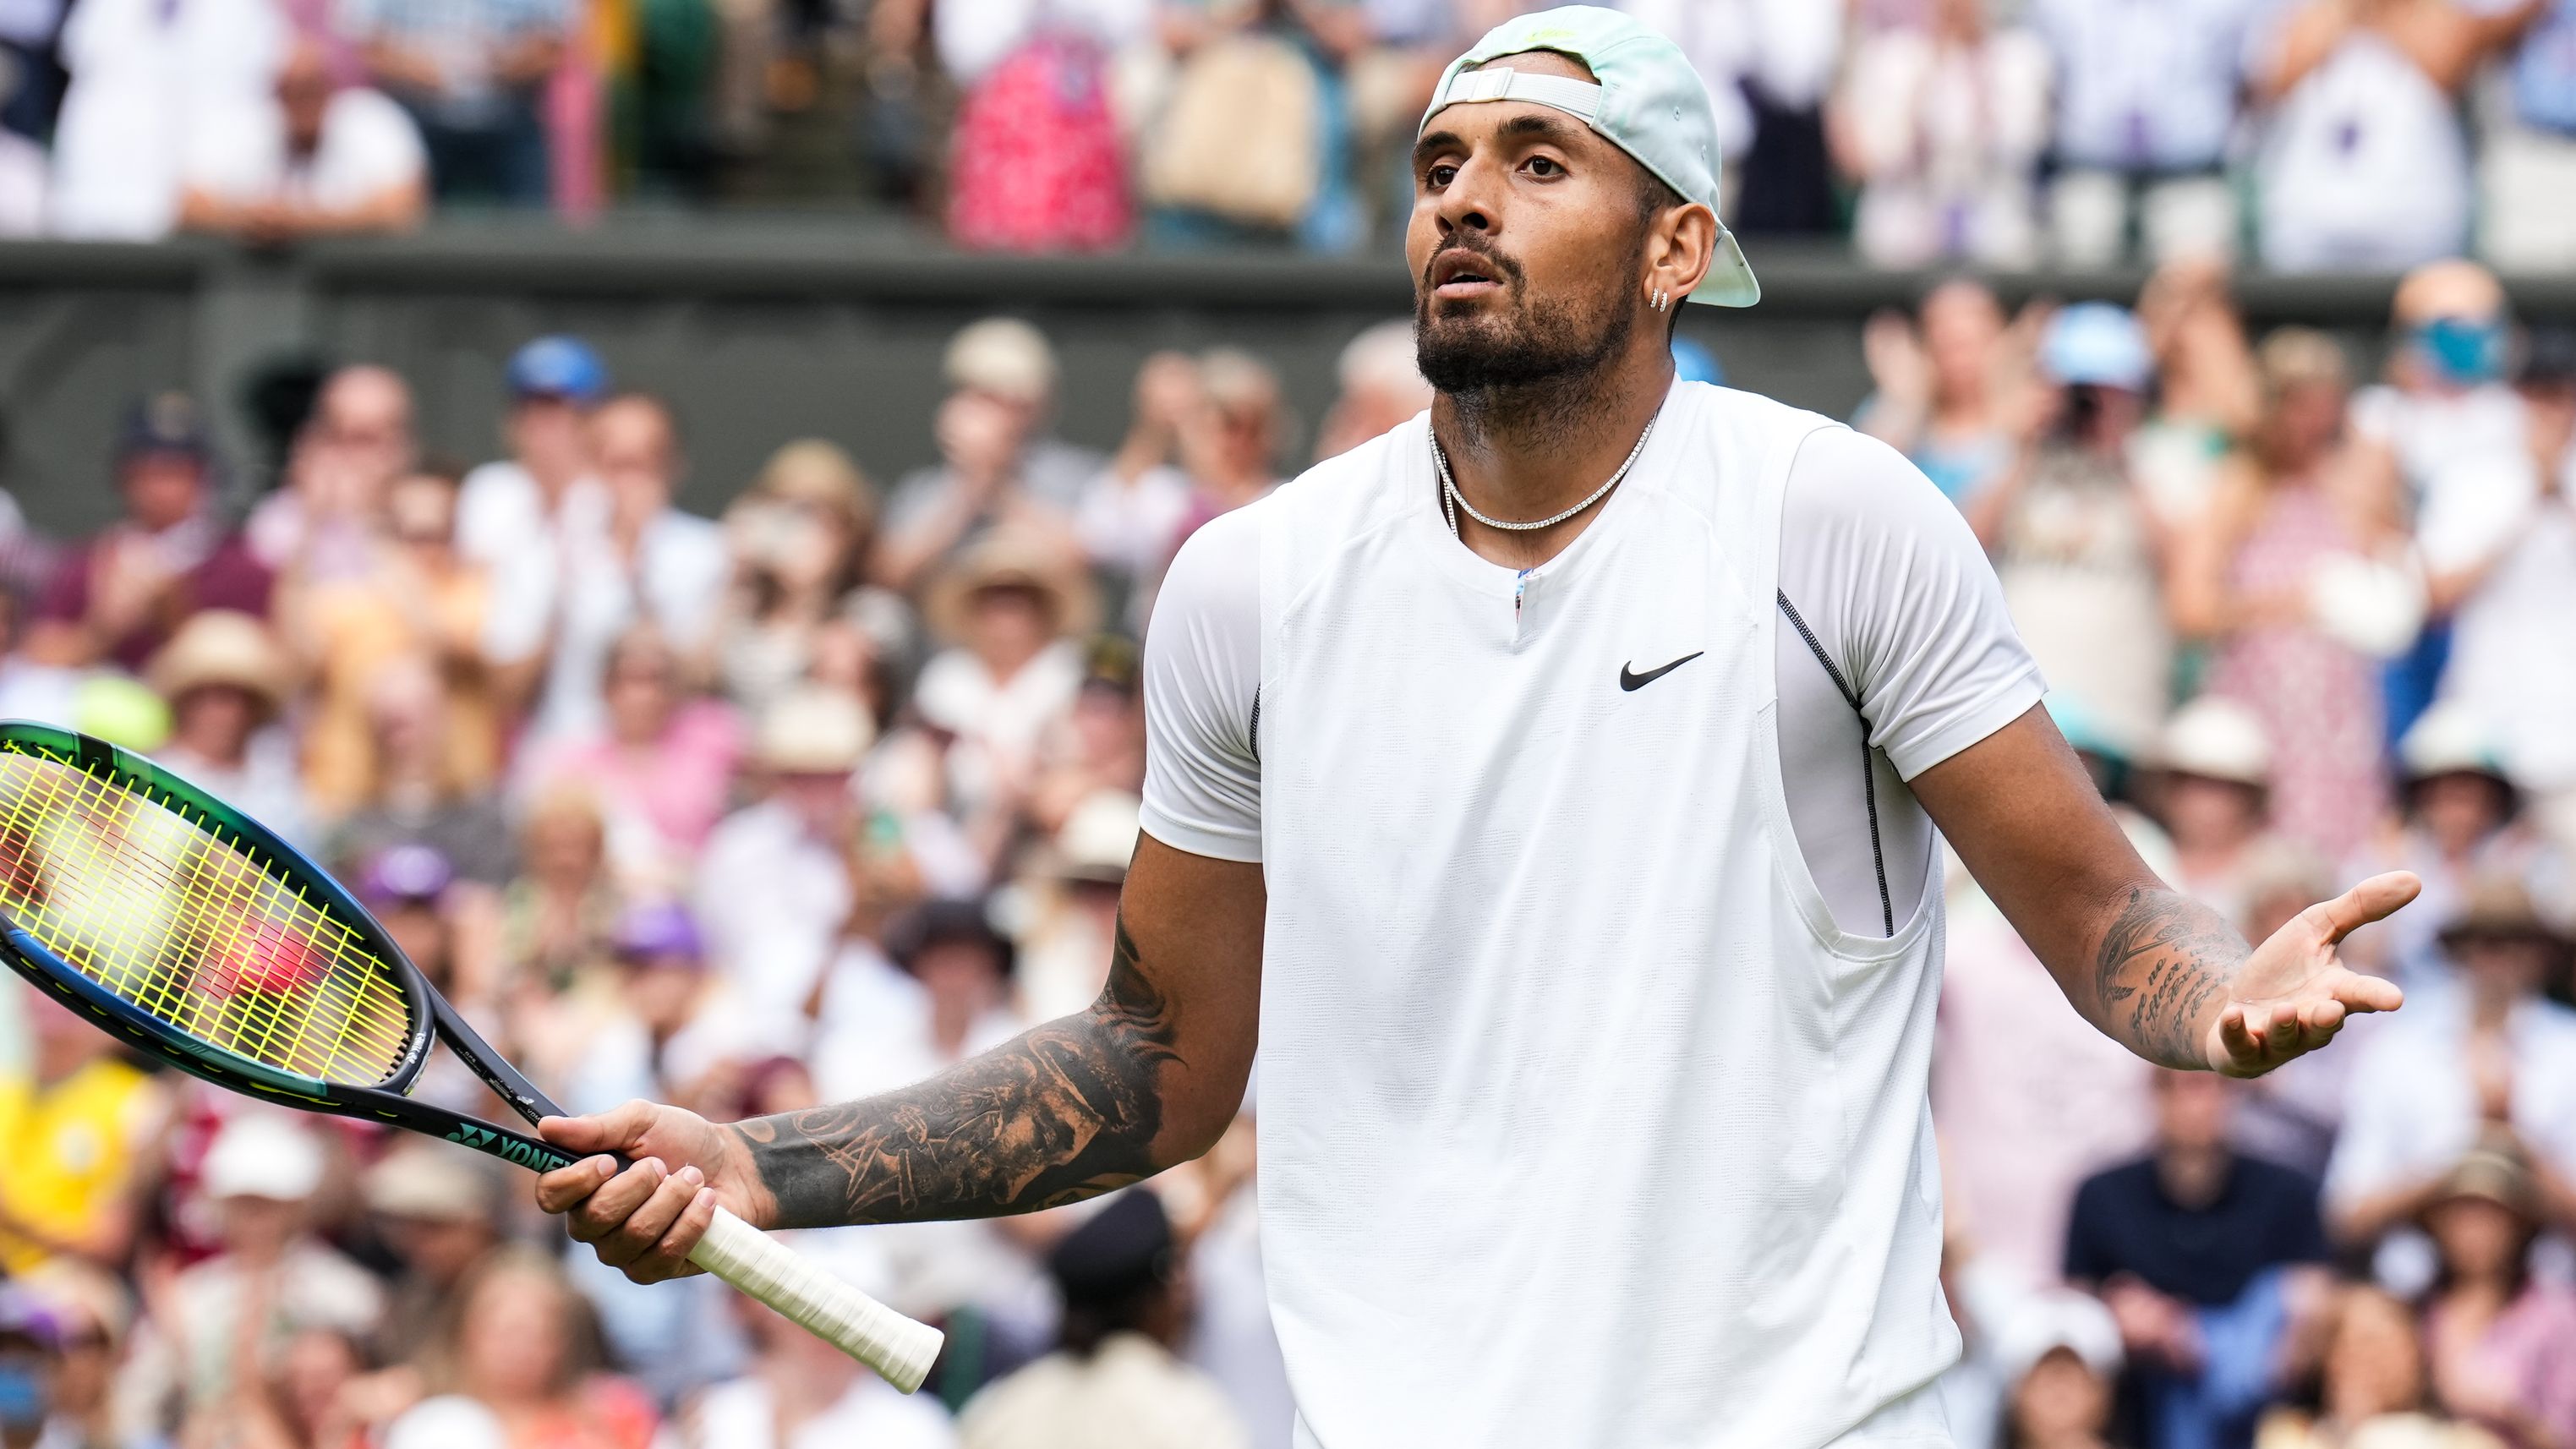 Nick Kyrgios of Australia celebrates victory in the fourth round Match against Brandon Nakashima during day eight of The Championships Wimbledon 2022.